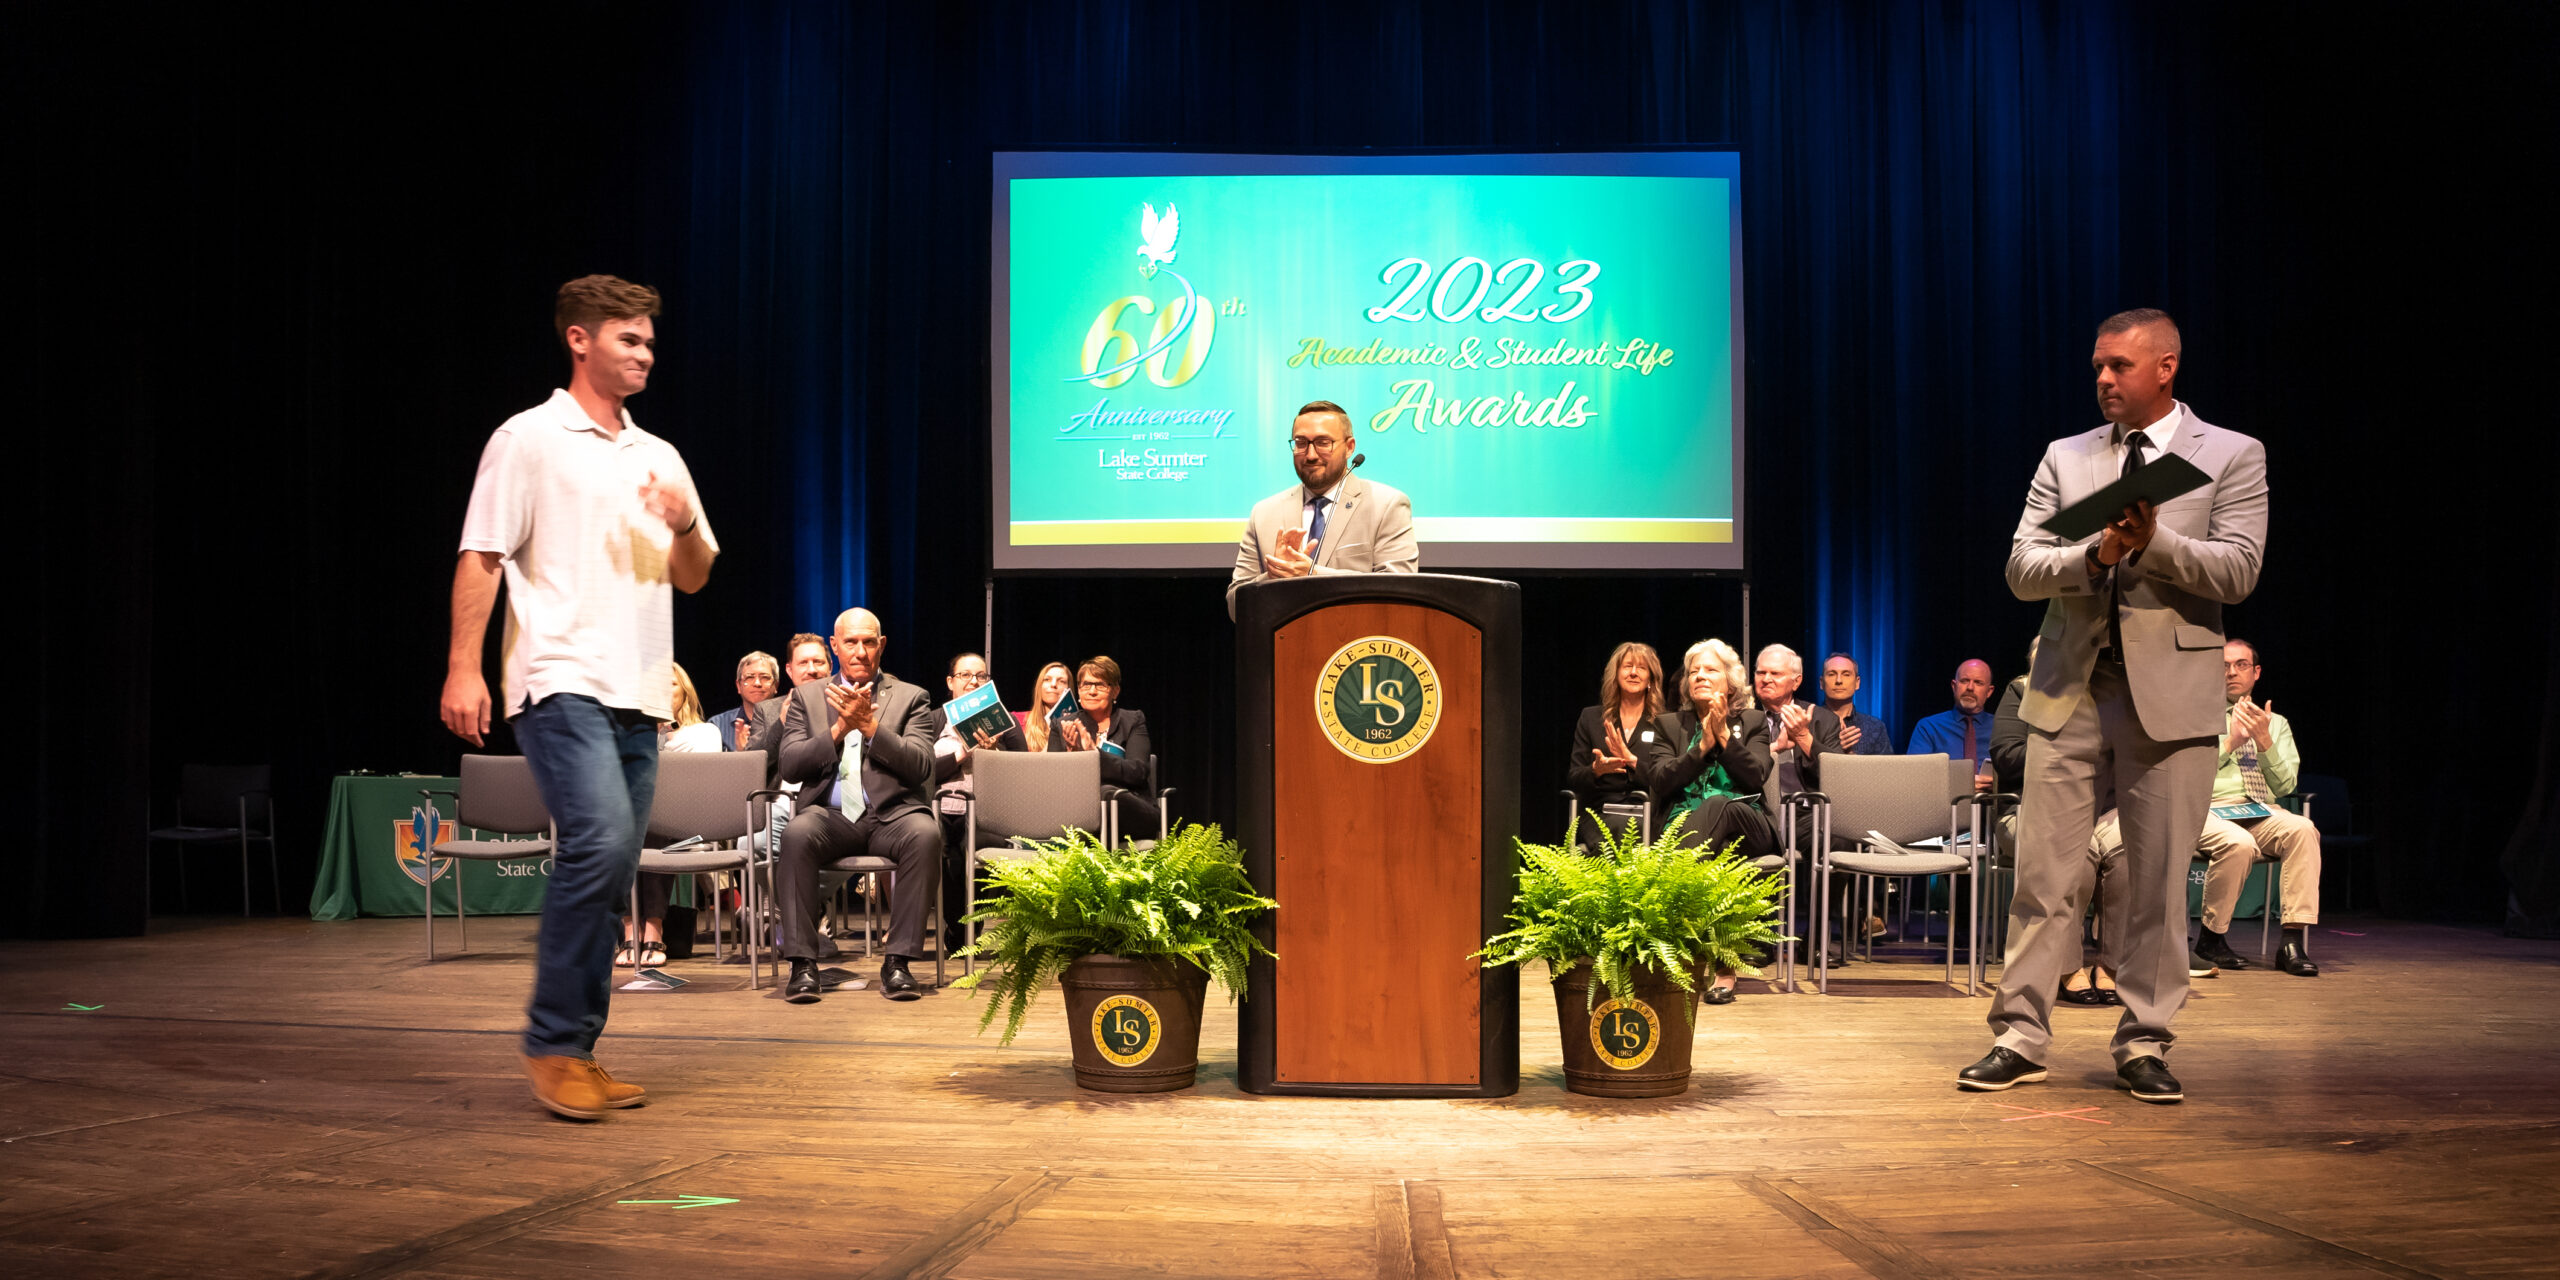 Lake-Sumter State College Recognizes Student Achievements at 2023 Academic and Student Life Awards